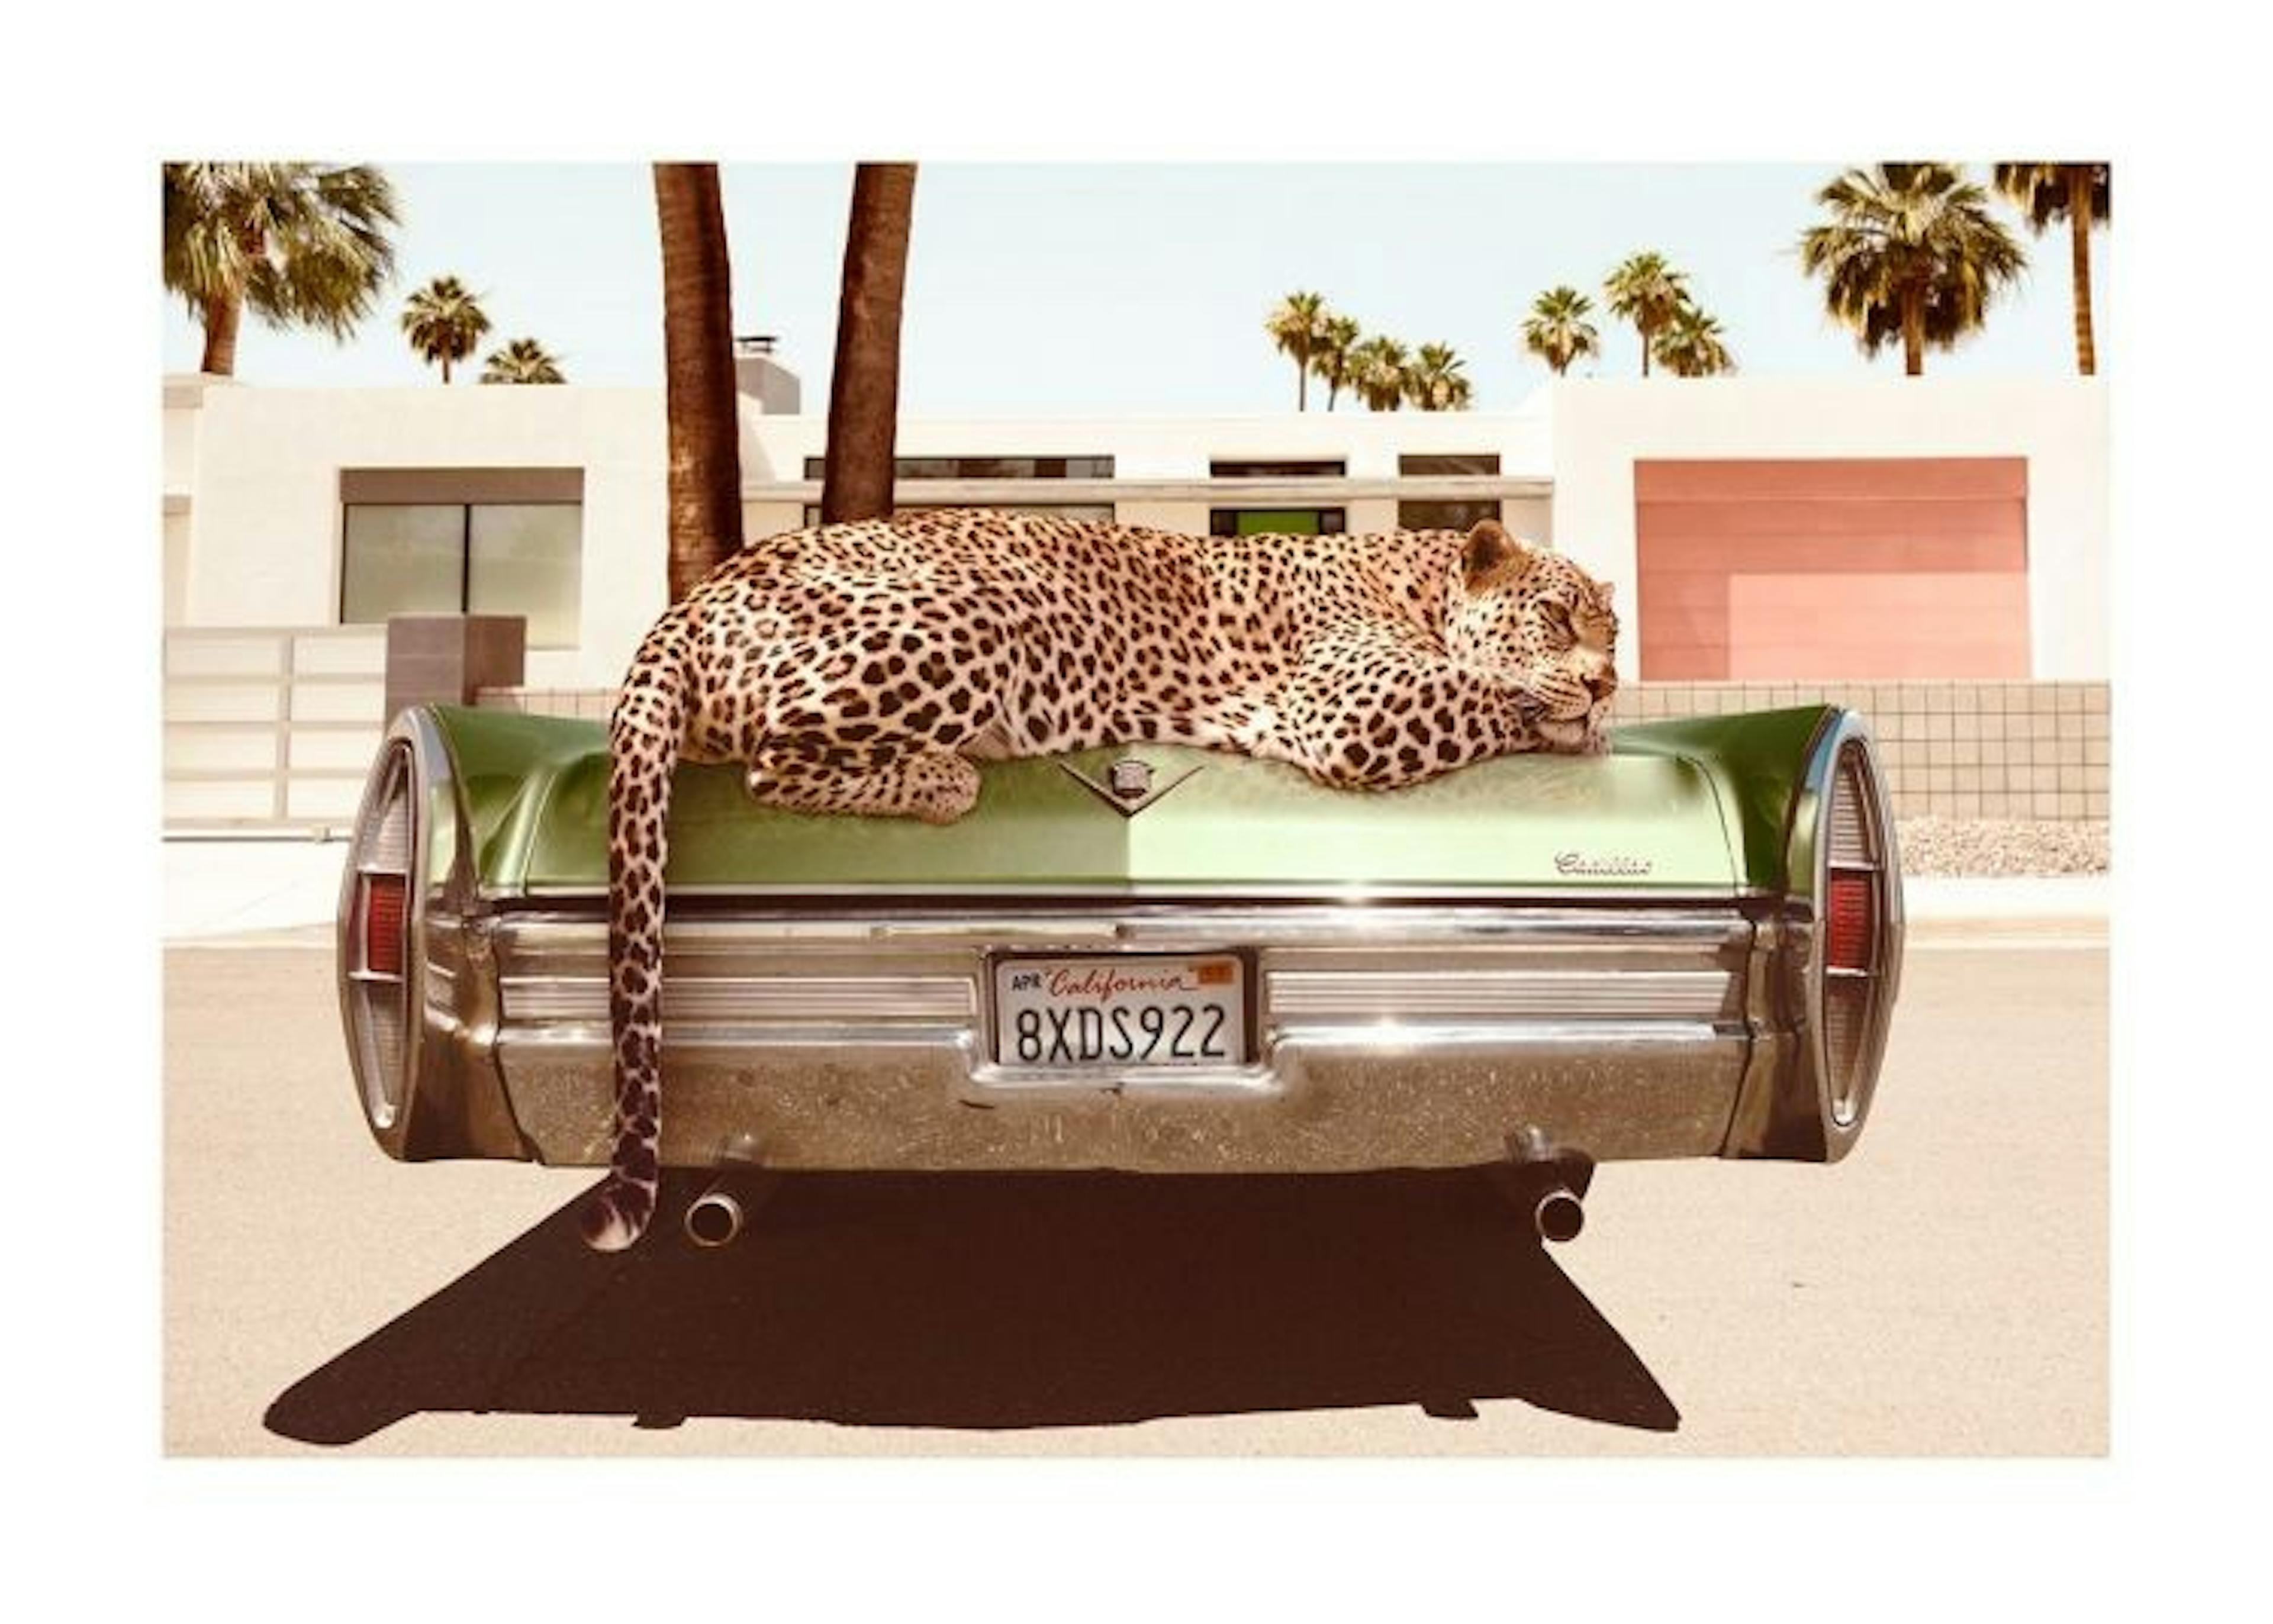 Chilling Leopard Poster